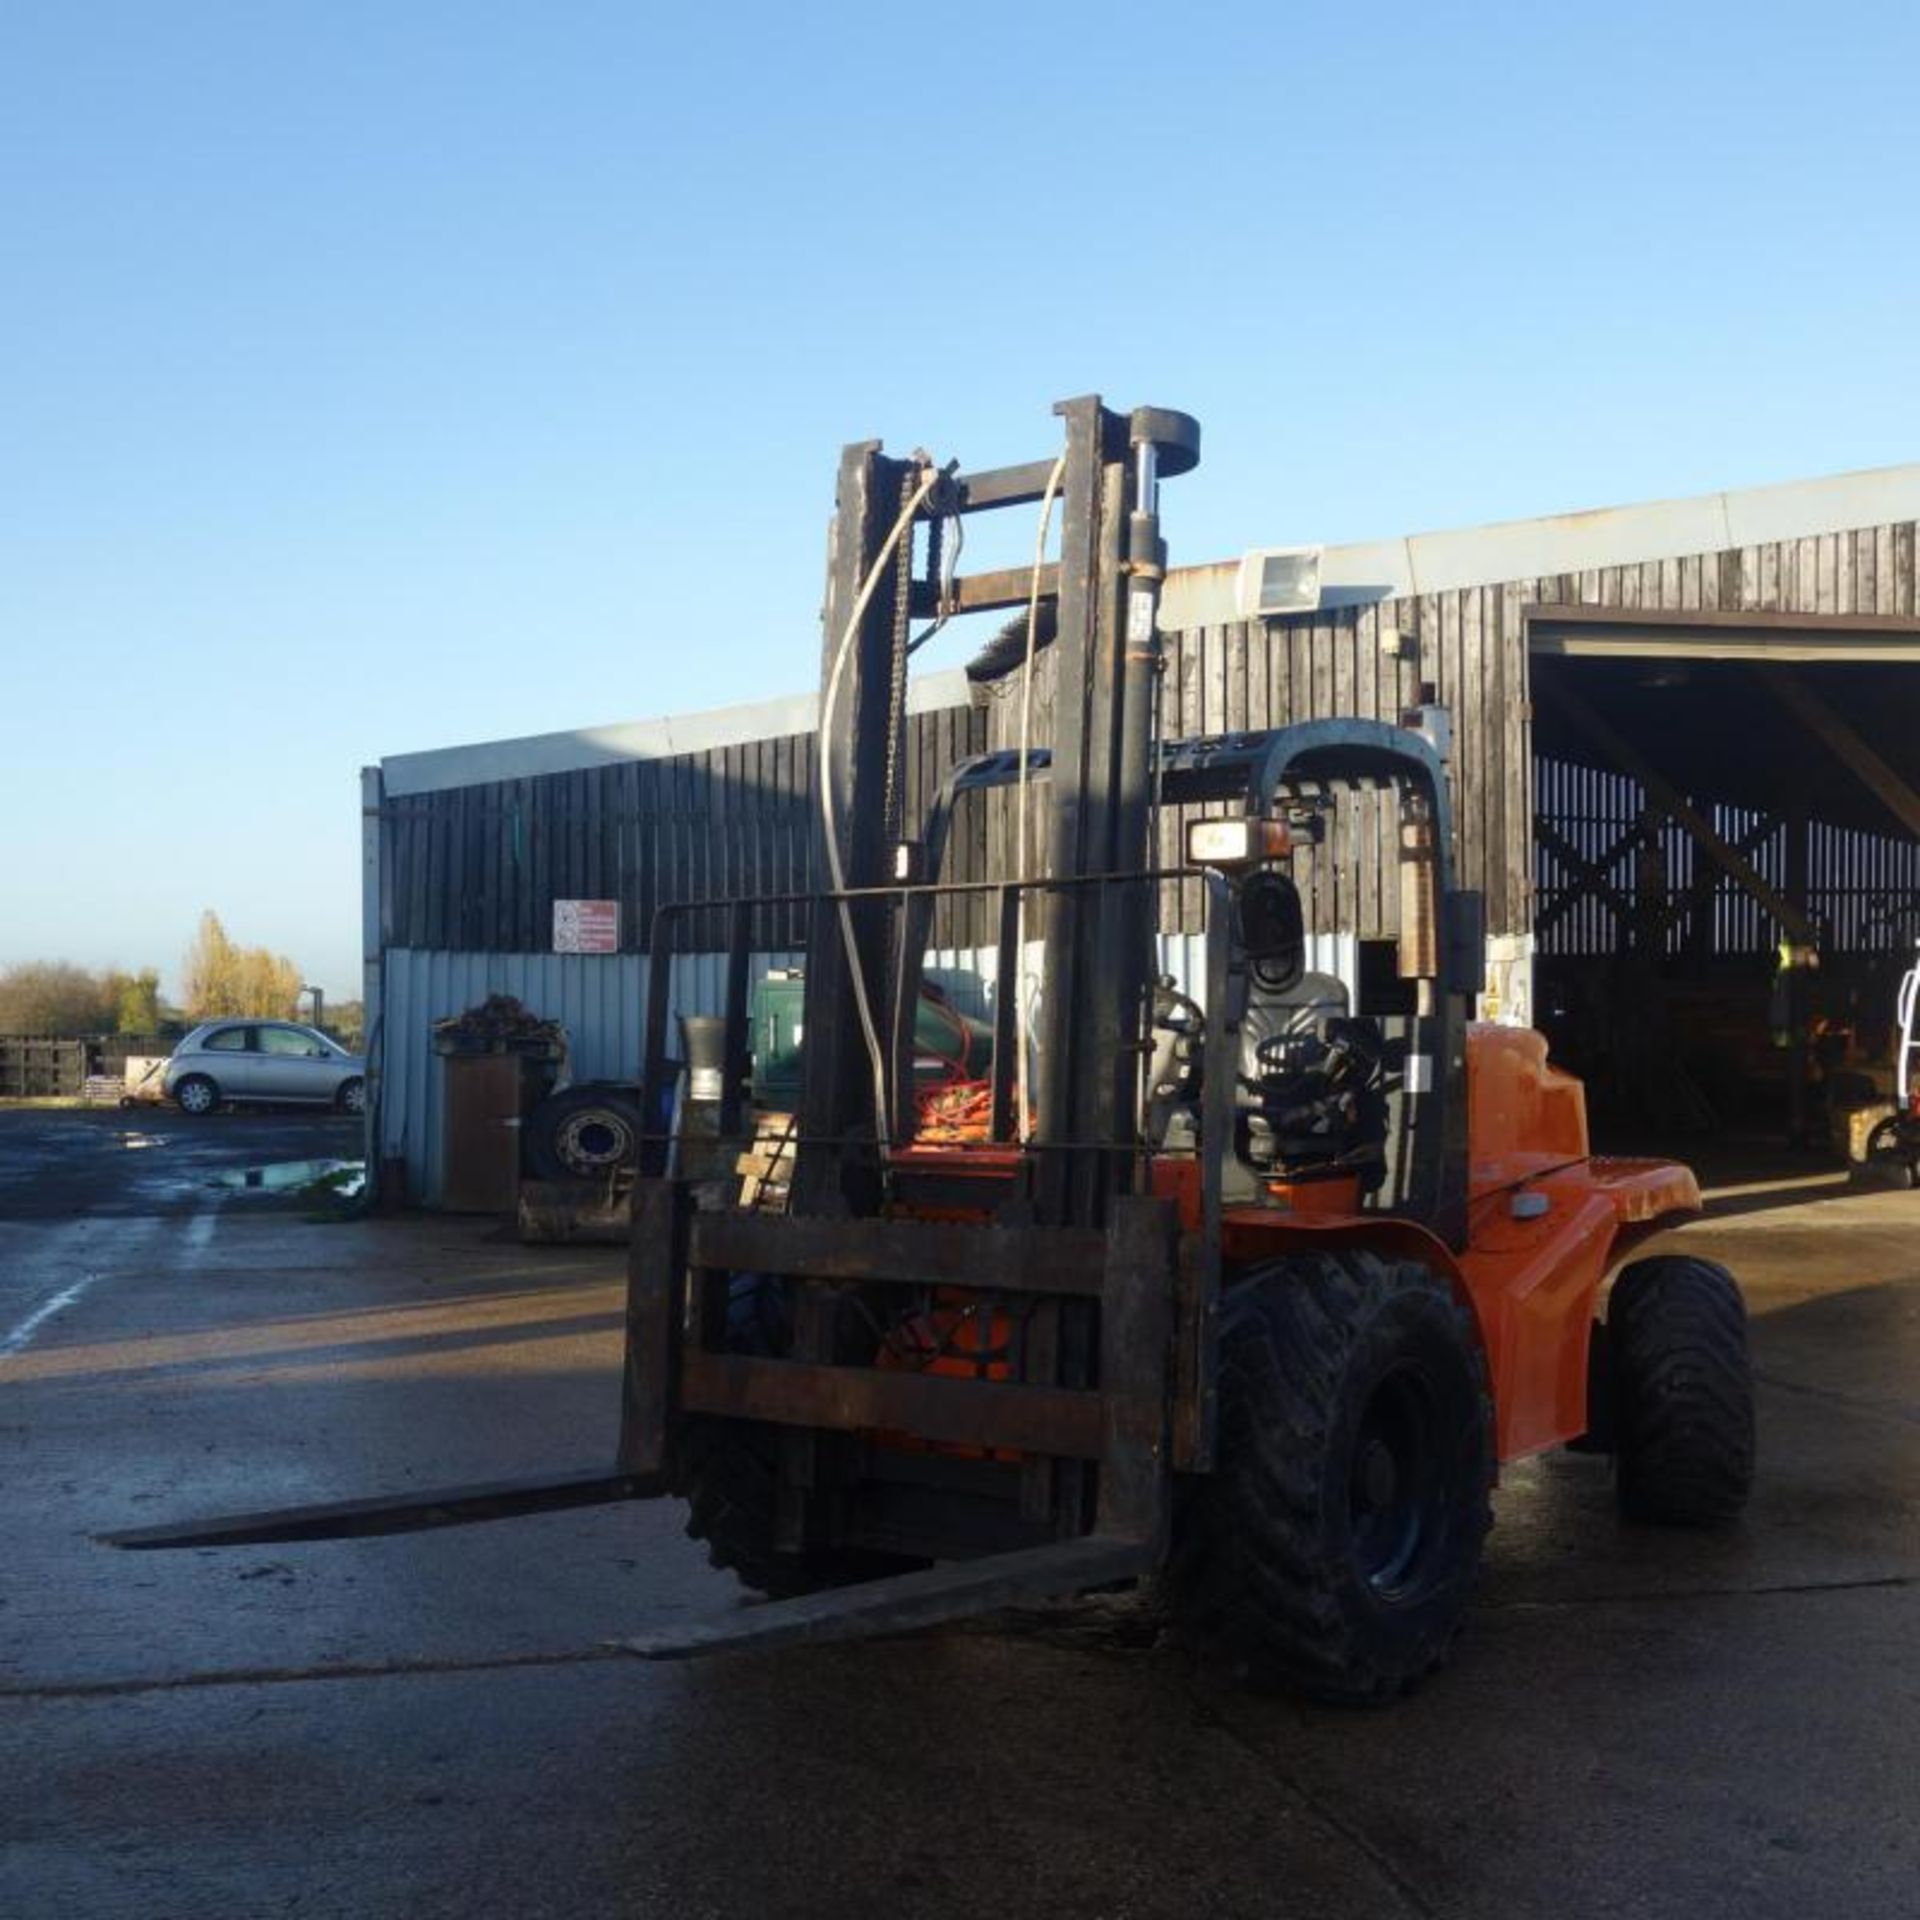 2011 MAST H50DA 4WD 5 Tonne 4x4 Forklift, Two Stage Mask - Image 7 of 11